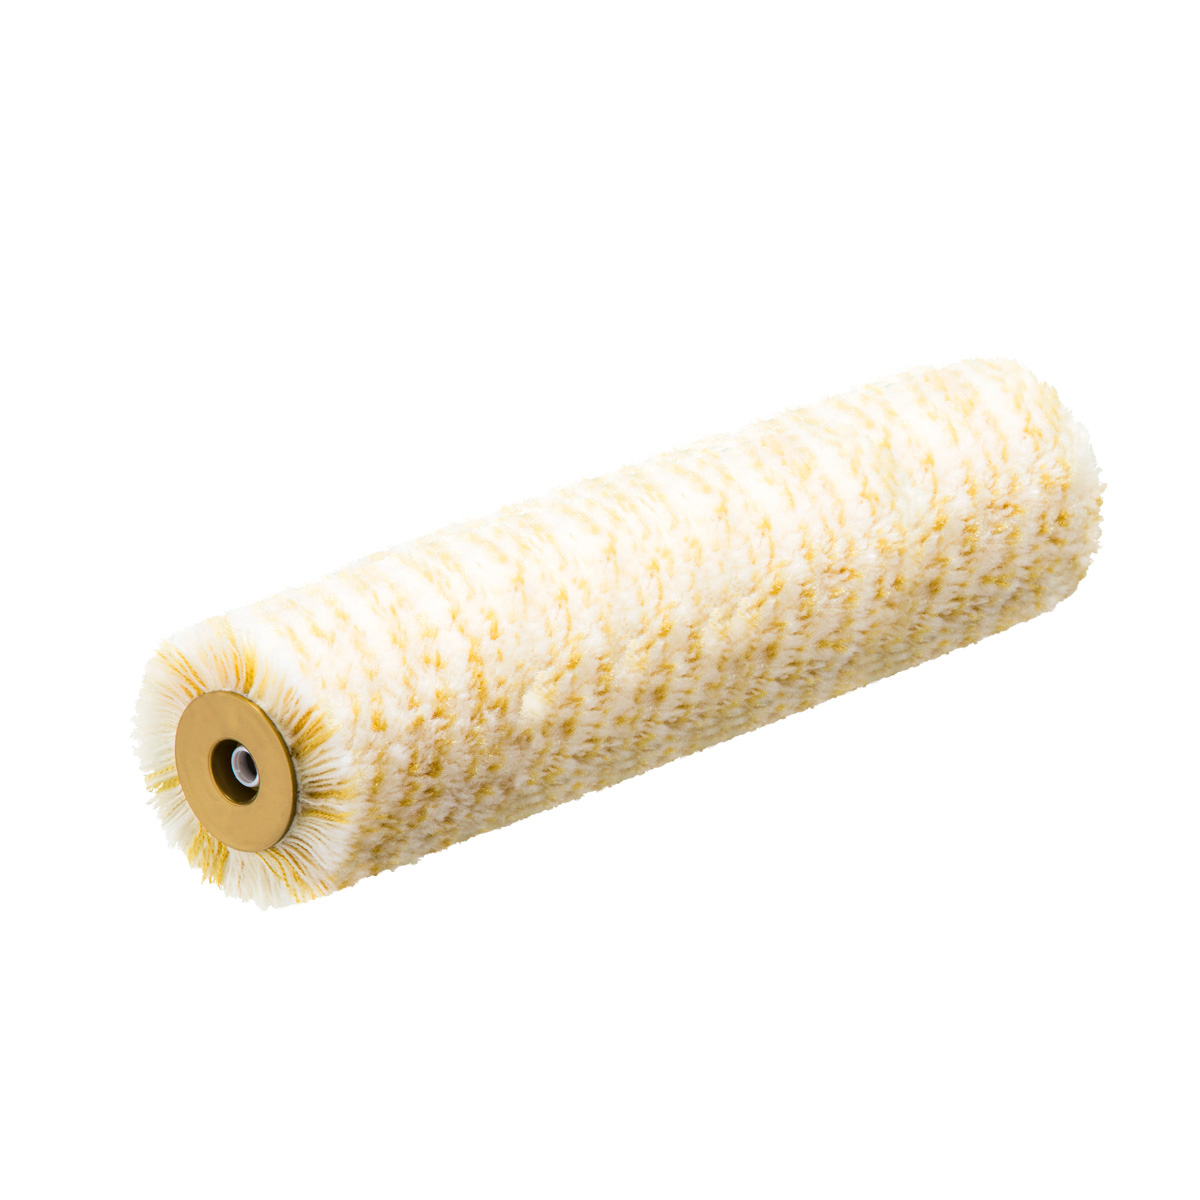 Paint roller Gold Exclusive 10